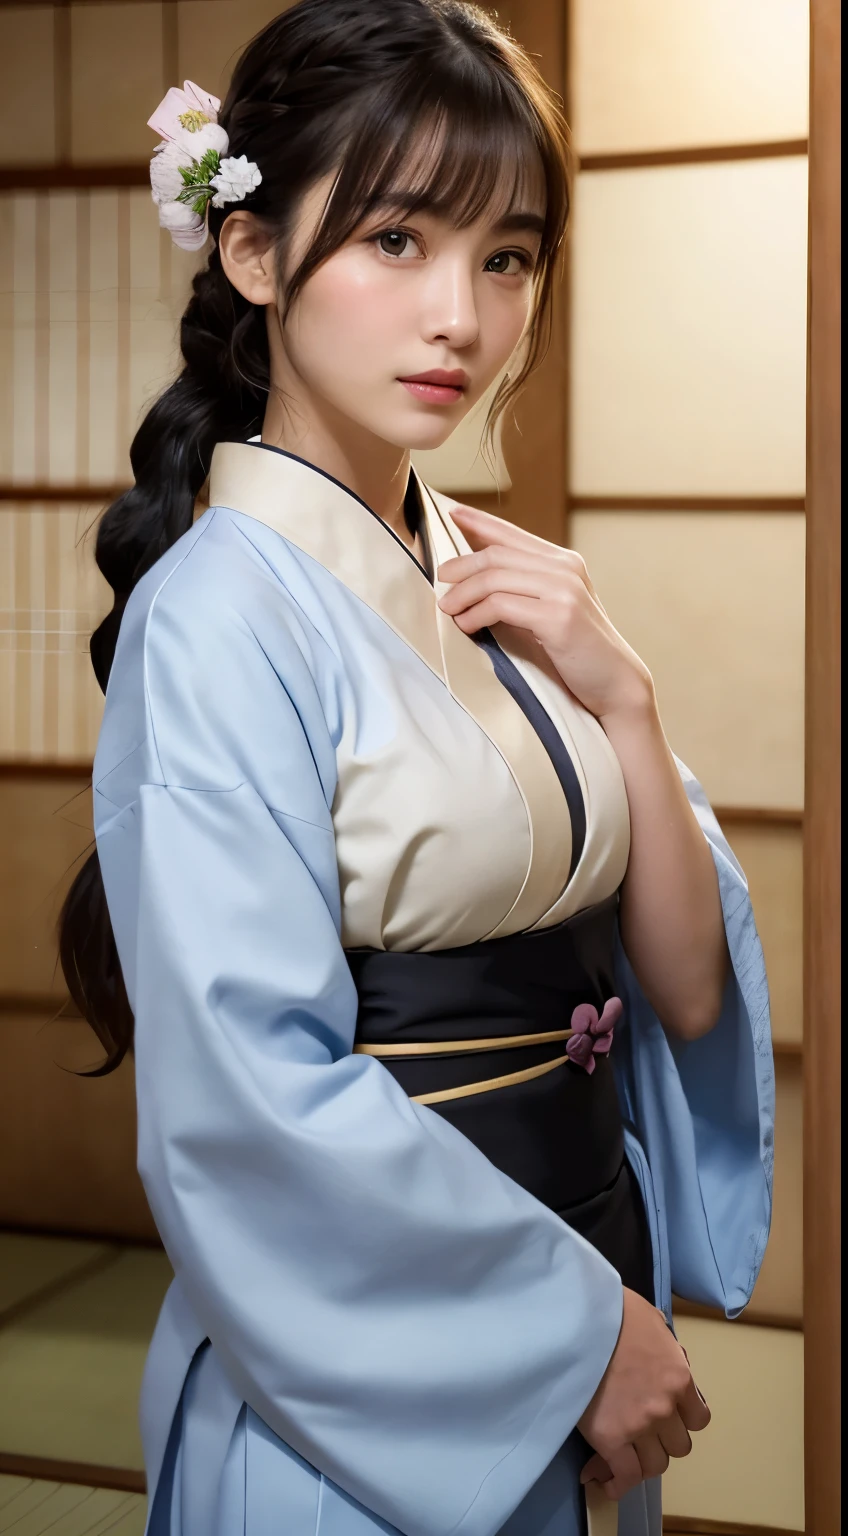 (Woman with Japan long bow:1.4)、1 girl,Black hair, long bangs、Braided hair、Messy Hair、Light brown eyes、(Extraordinary beauty)、(Dignified look)、(Similarly:1.4)、(Big Breasts:1.4)、dojo、(Photorealistic)、(Intricate details:1.2)、(masterpiece、:1.3)、(highest quality:1.4)、(超A high resolution:1.2)、超A high resolution、(Detailed eyes)、(Detailed facial features)、Peony Japanese Kimono、12 people:1.8)